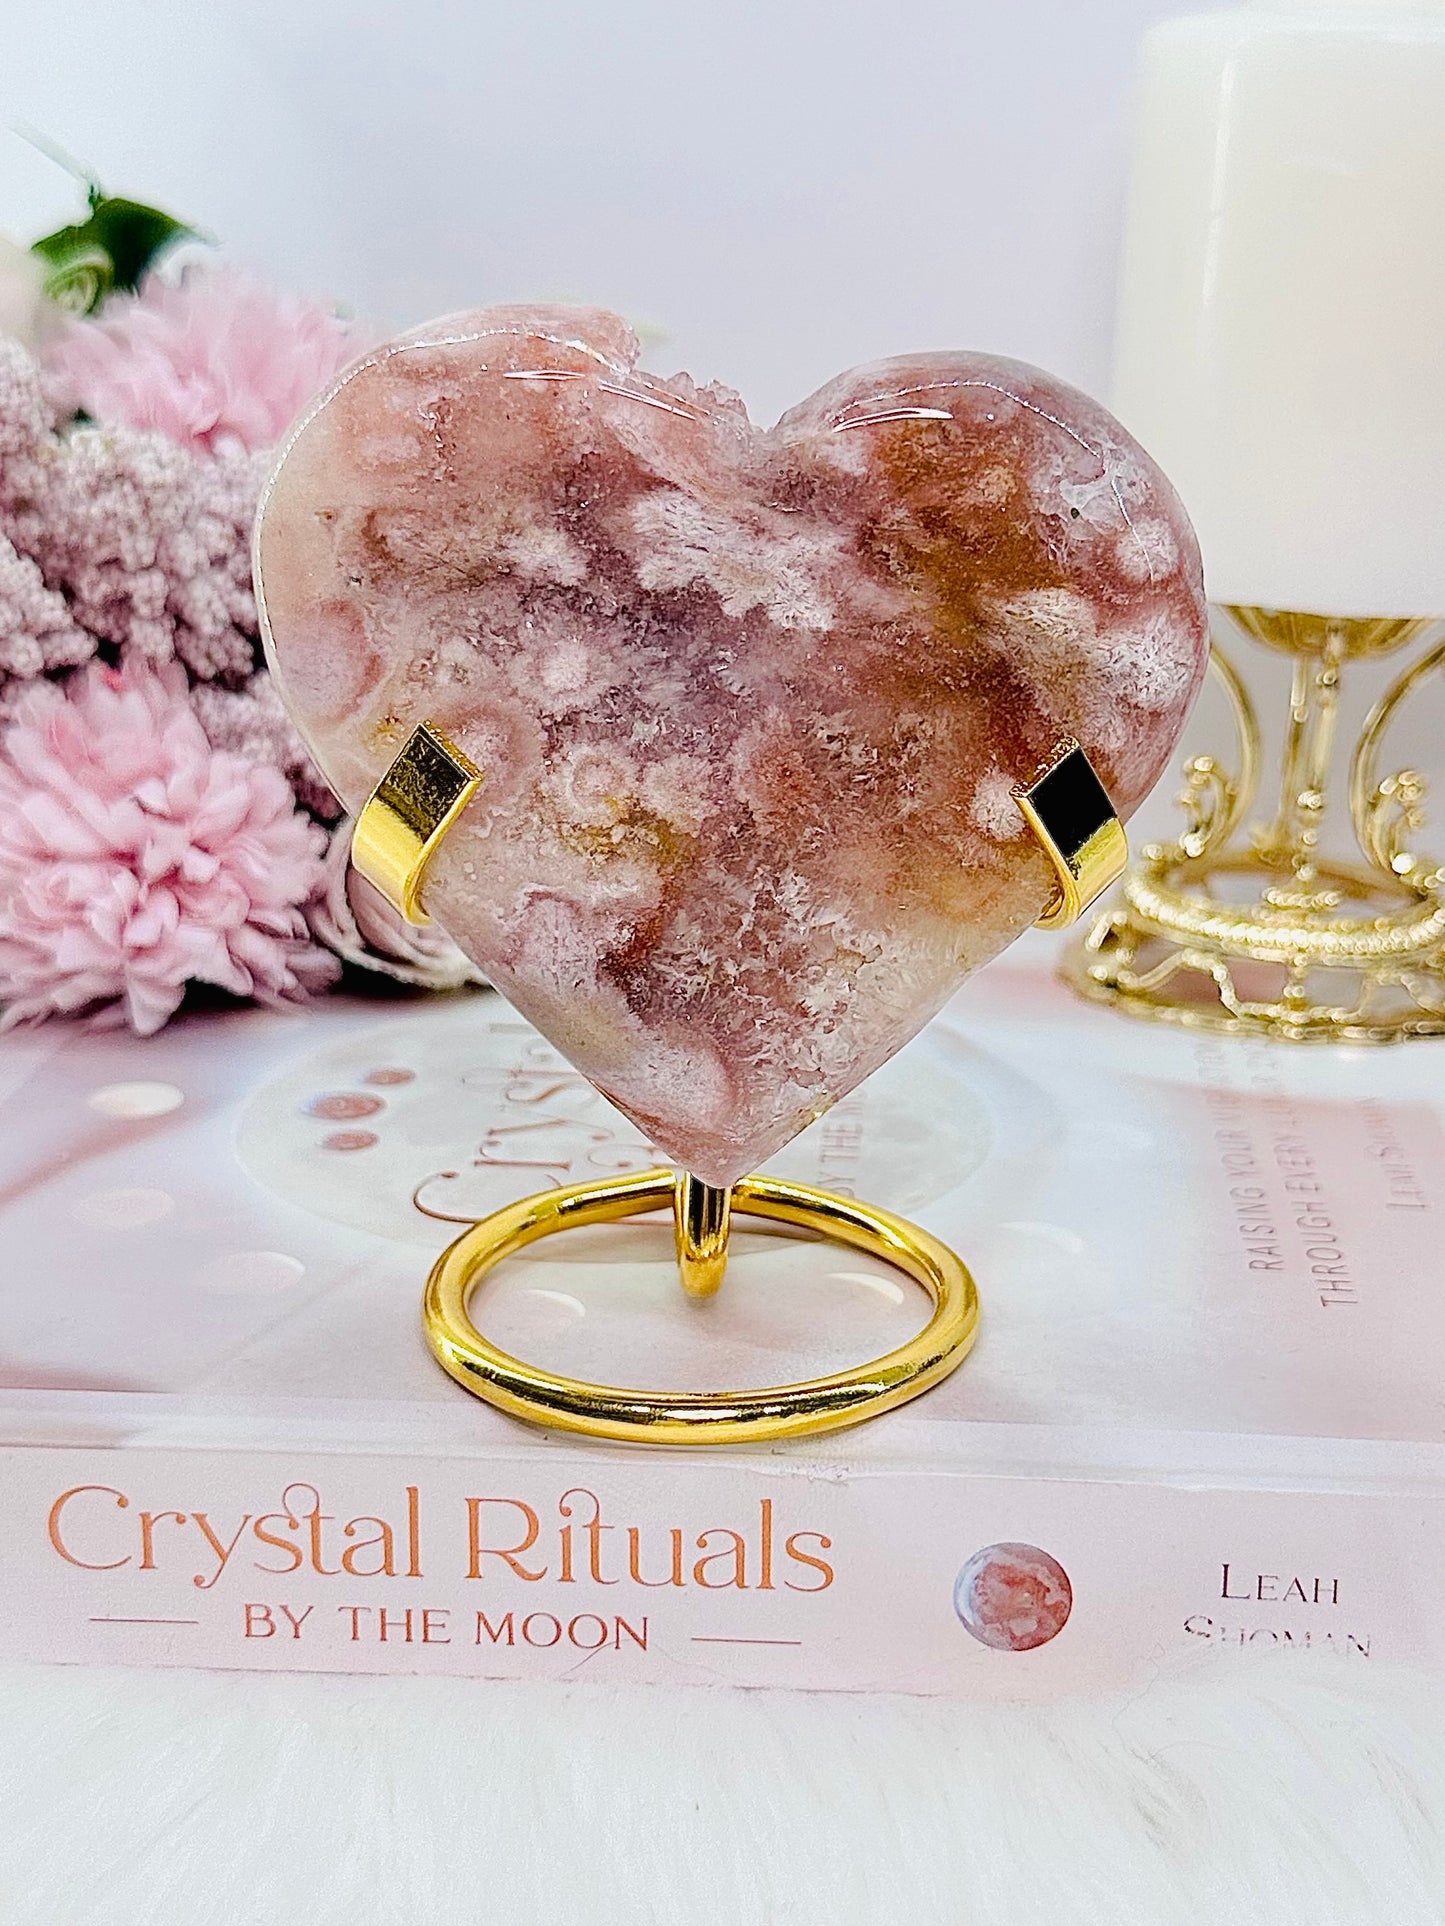 Stunning Rare Combination Pink Amethyst Druzy X Flower Agate Heart 298grams On Gold Stand